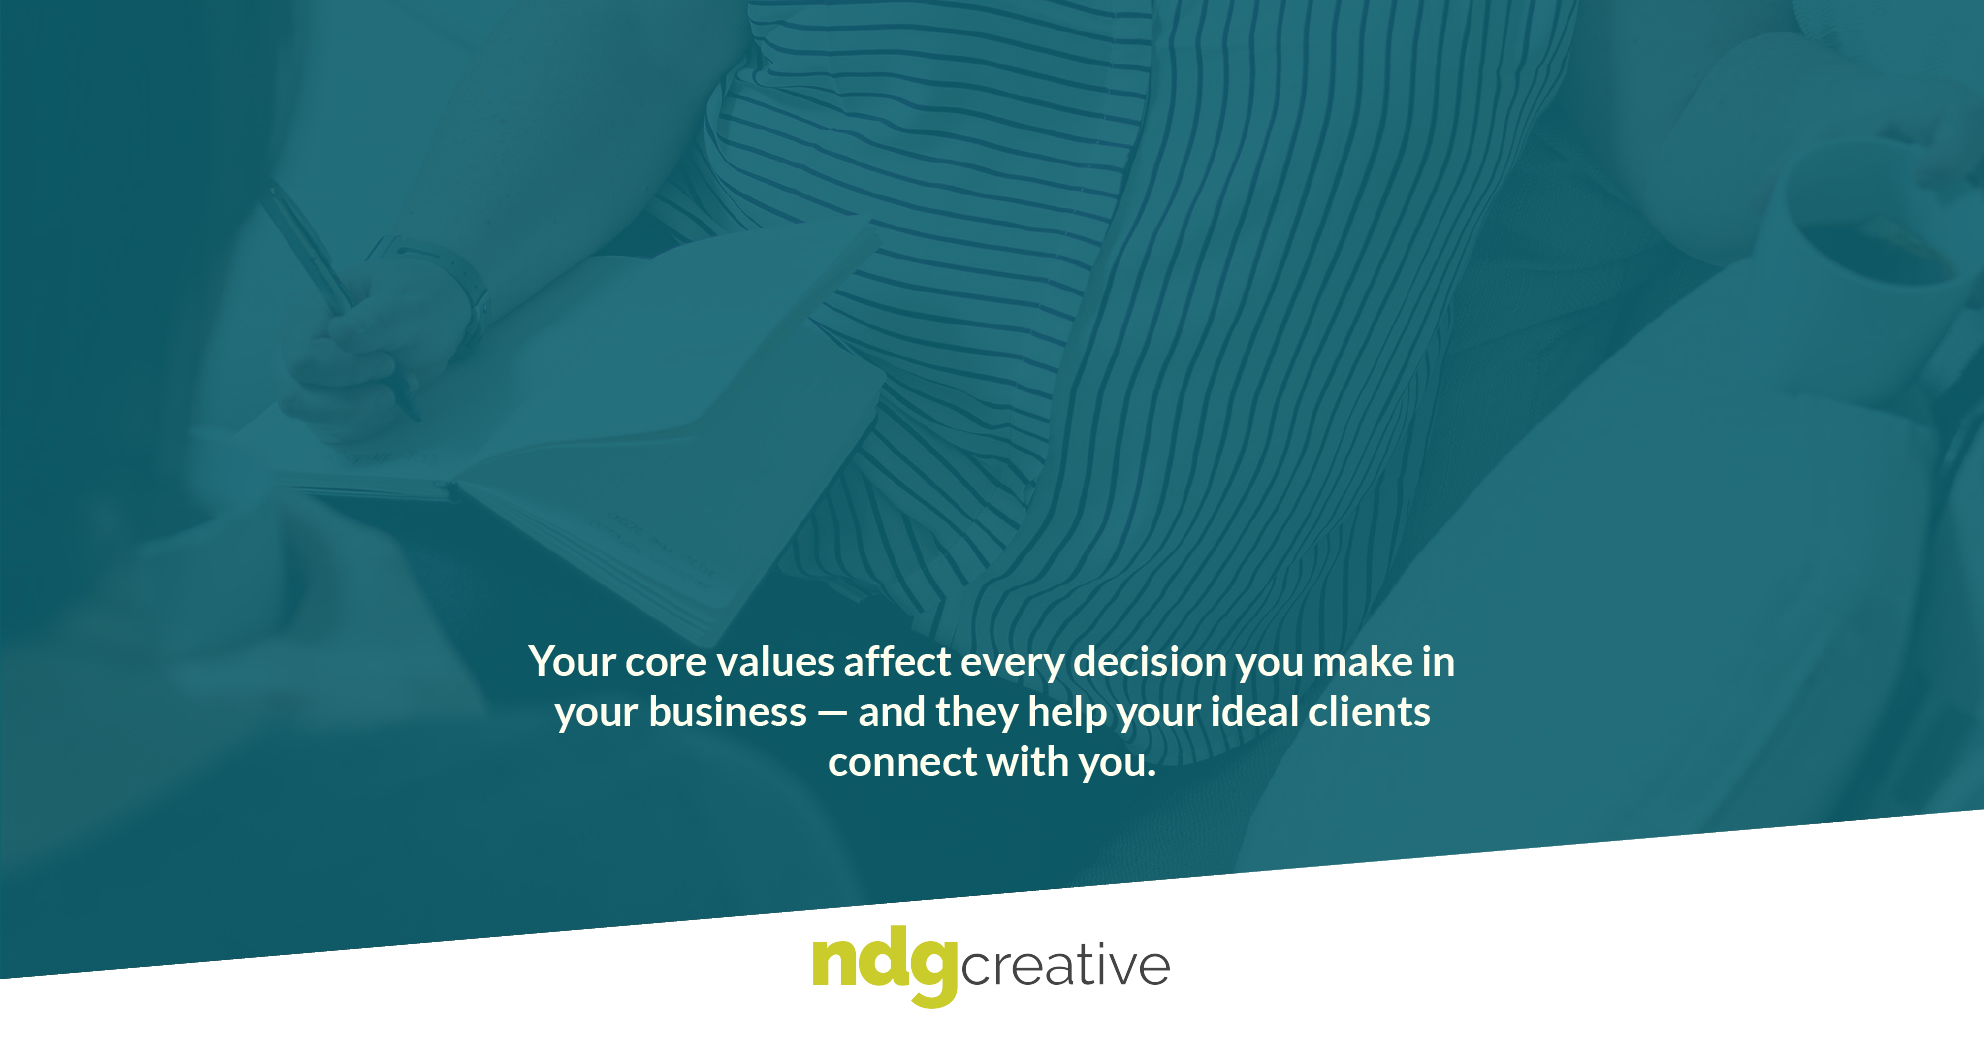 Your core values affect every decision you make in your business — and they help your ideal clientsconnect with you.